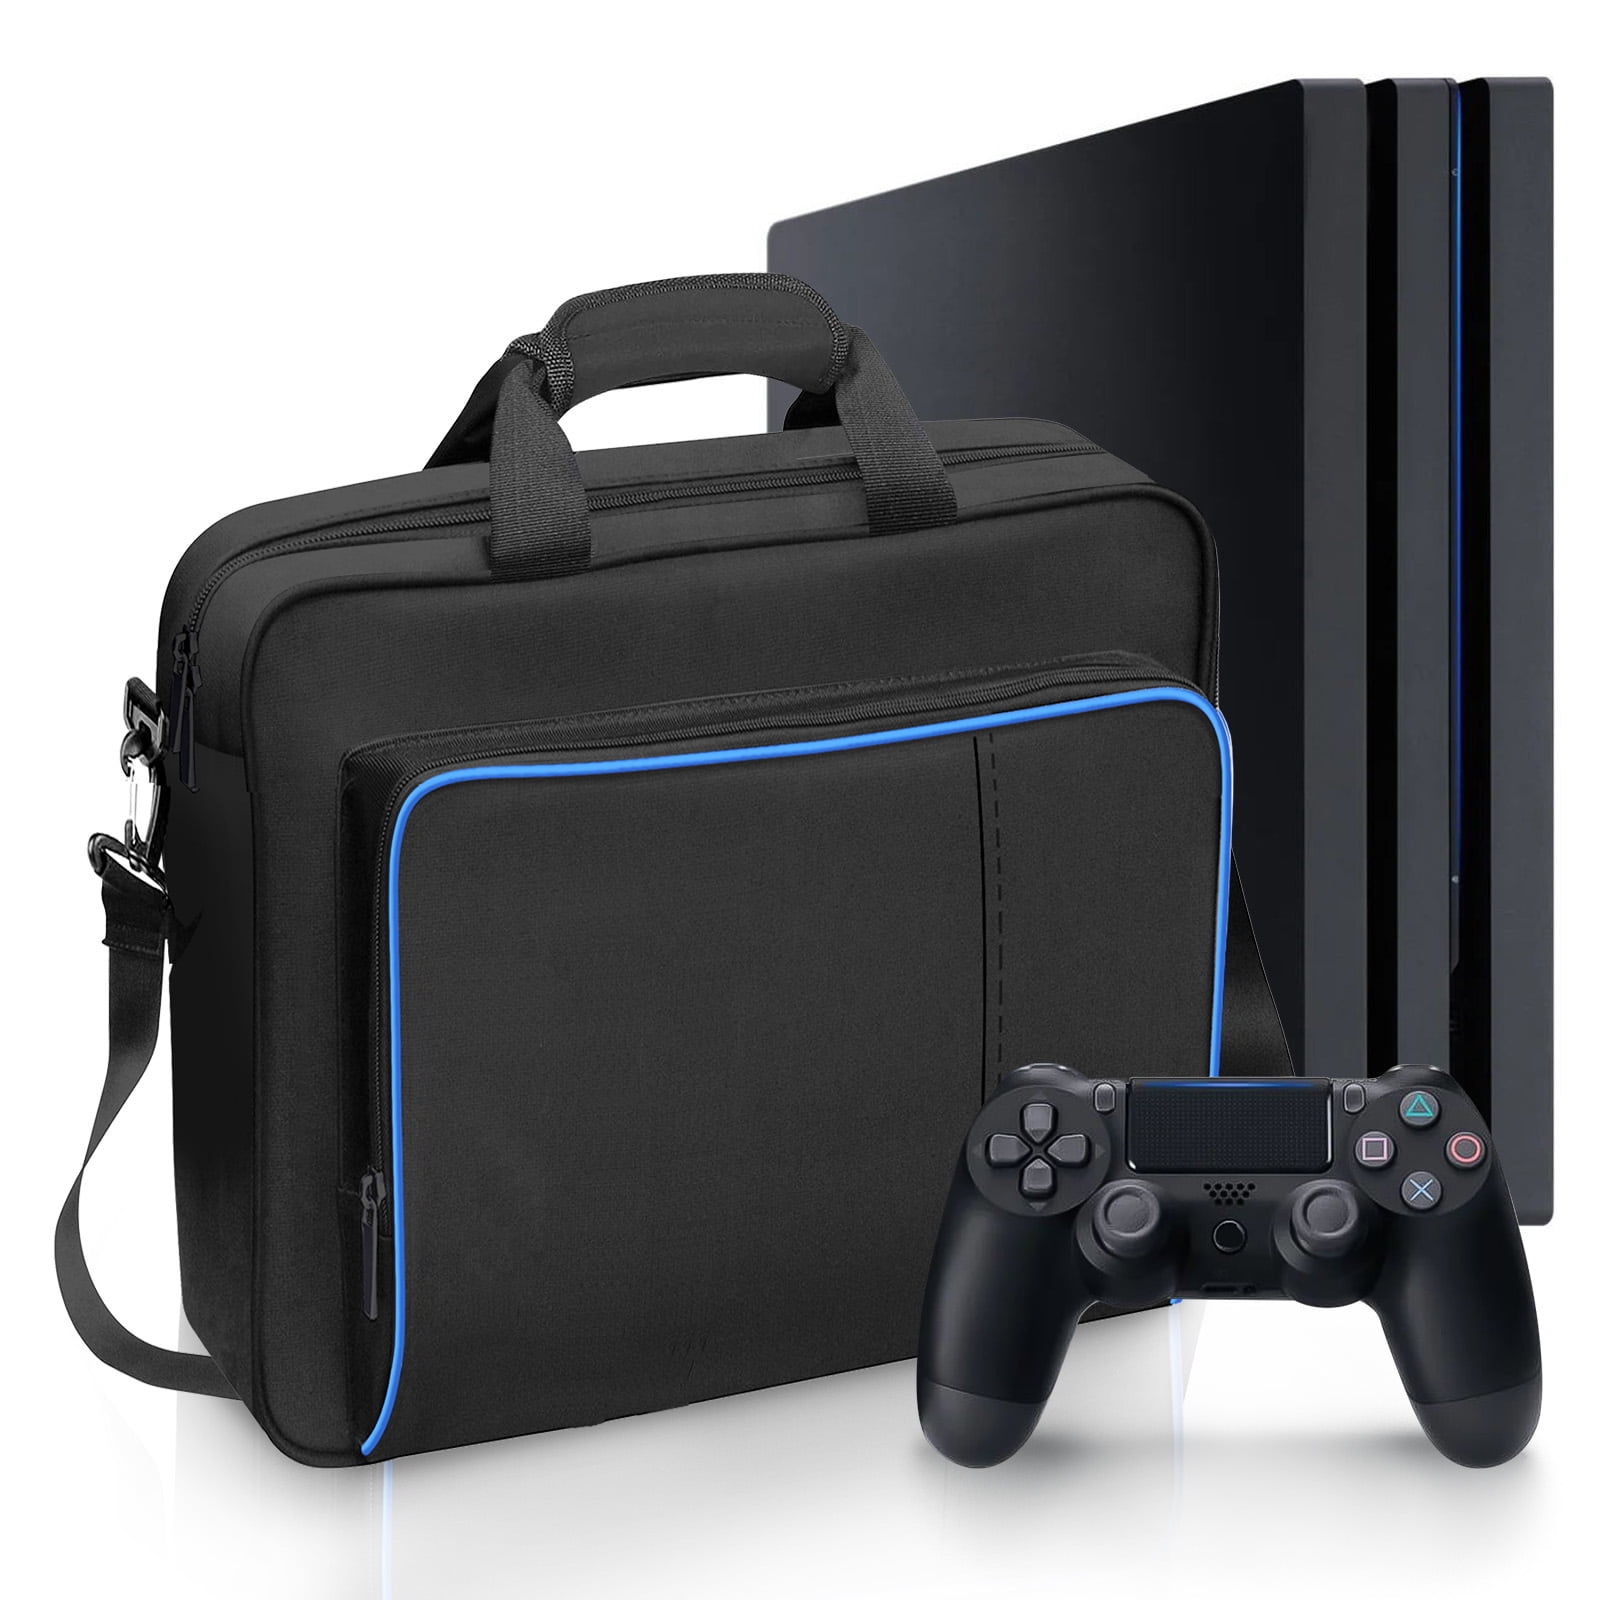 EEEkit Carrying Case Multifunctional Waterproof Carry Bag Travel Case Portable Shoulder Bag for Sony Playstation 4 PS4 Console - Walmart.com